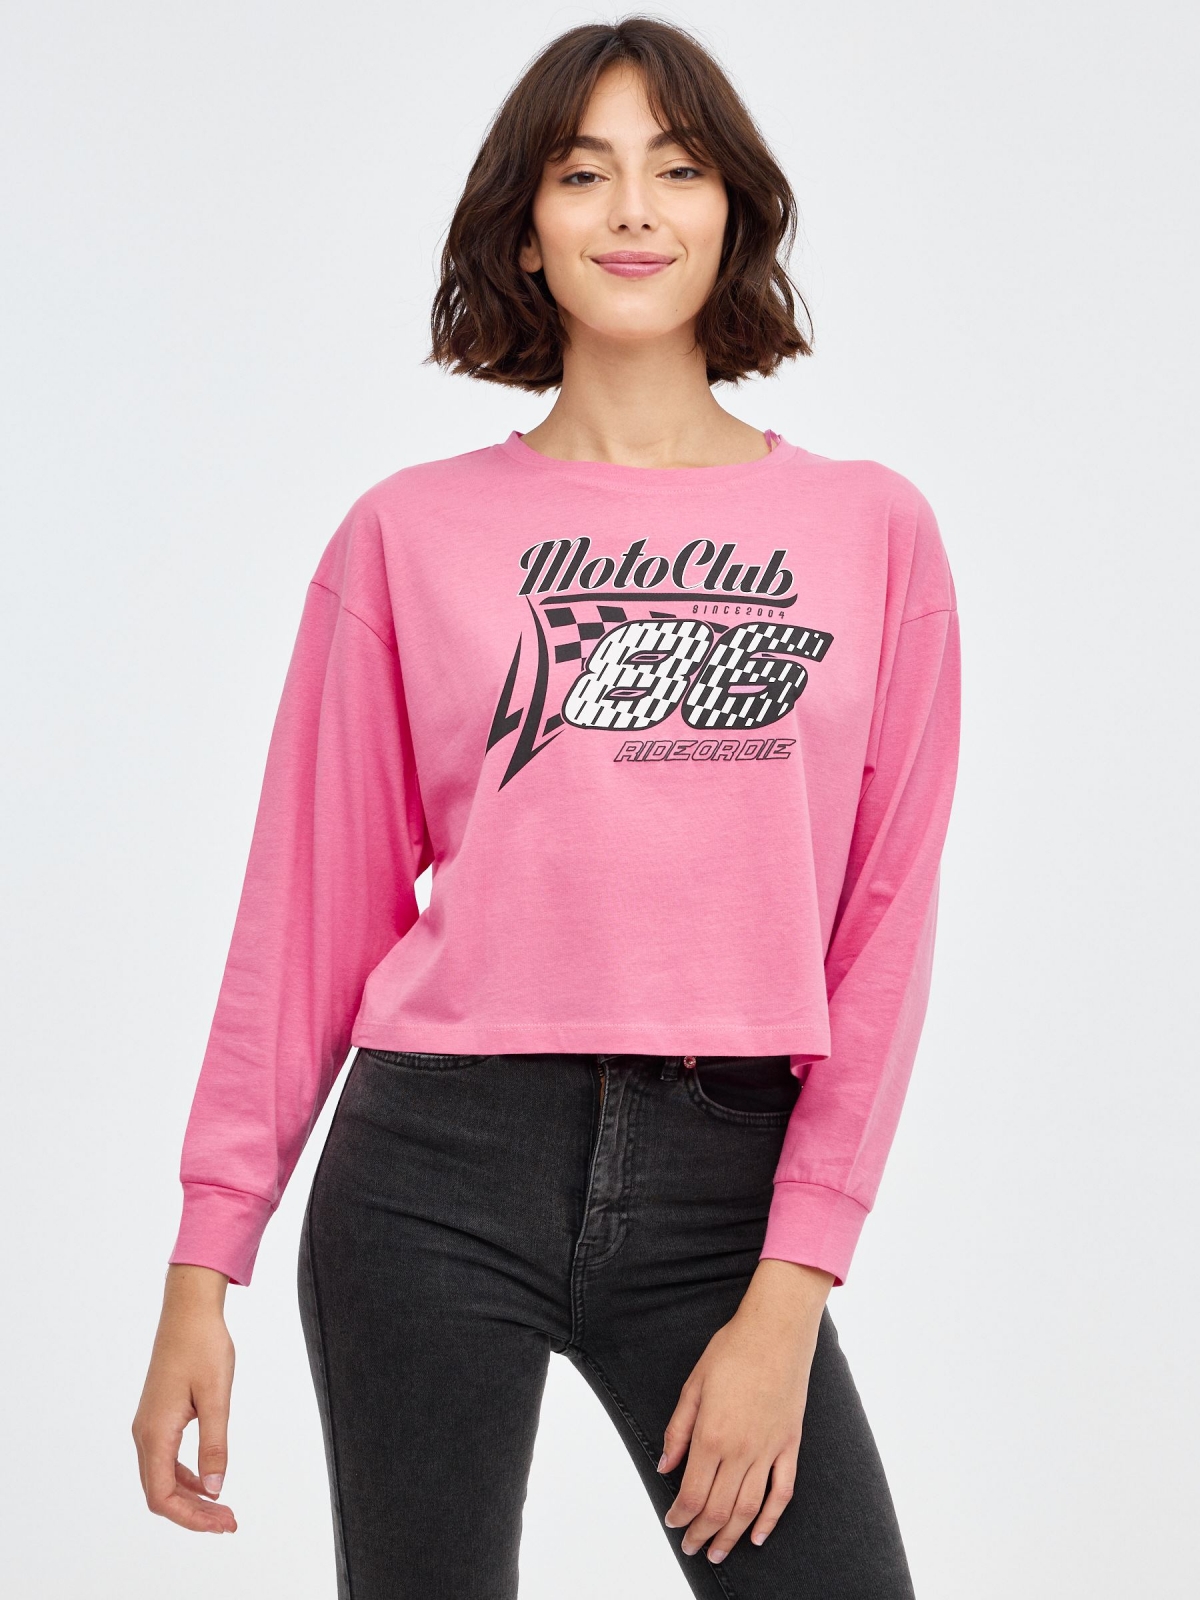 Moto Club crop top pink middle front view